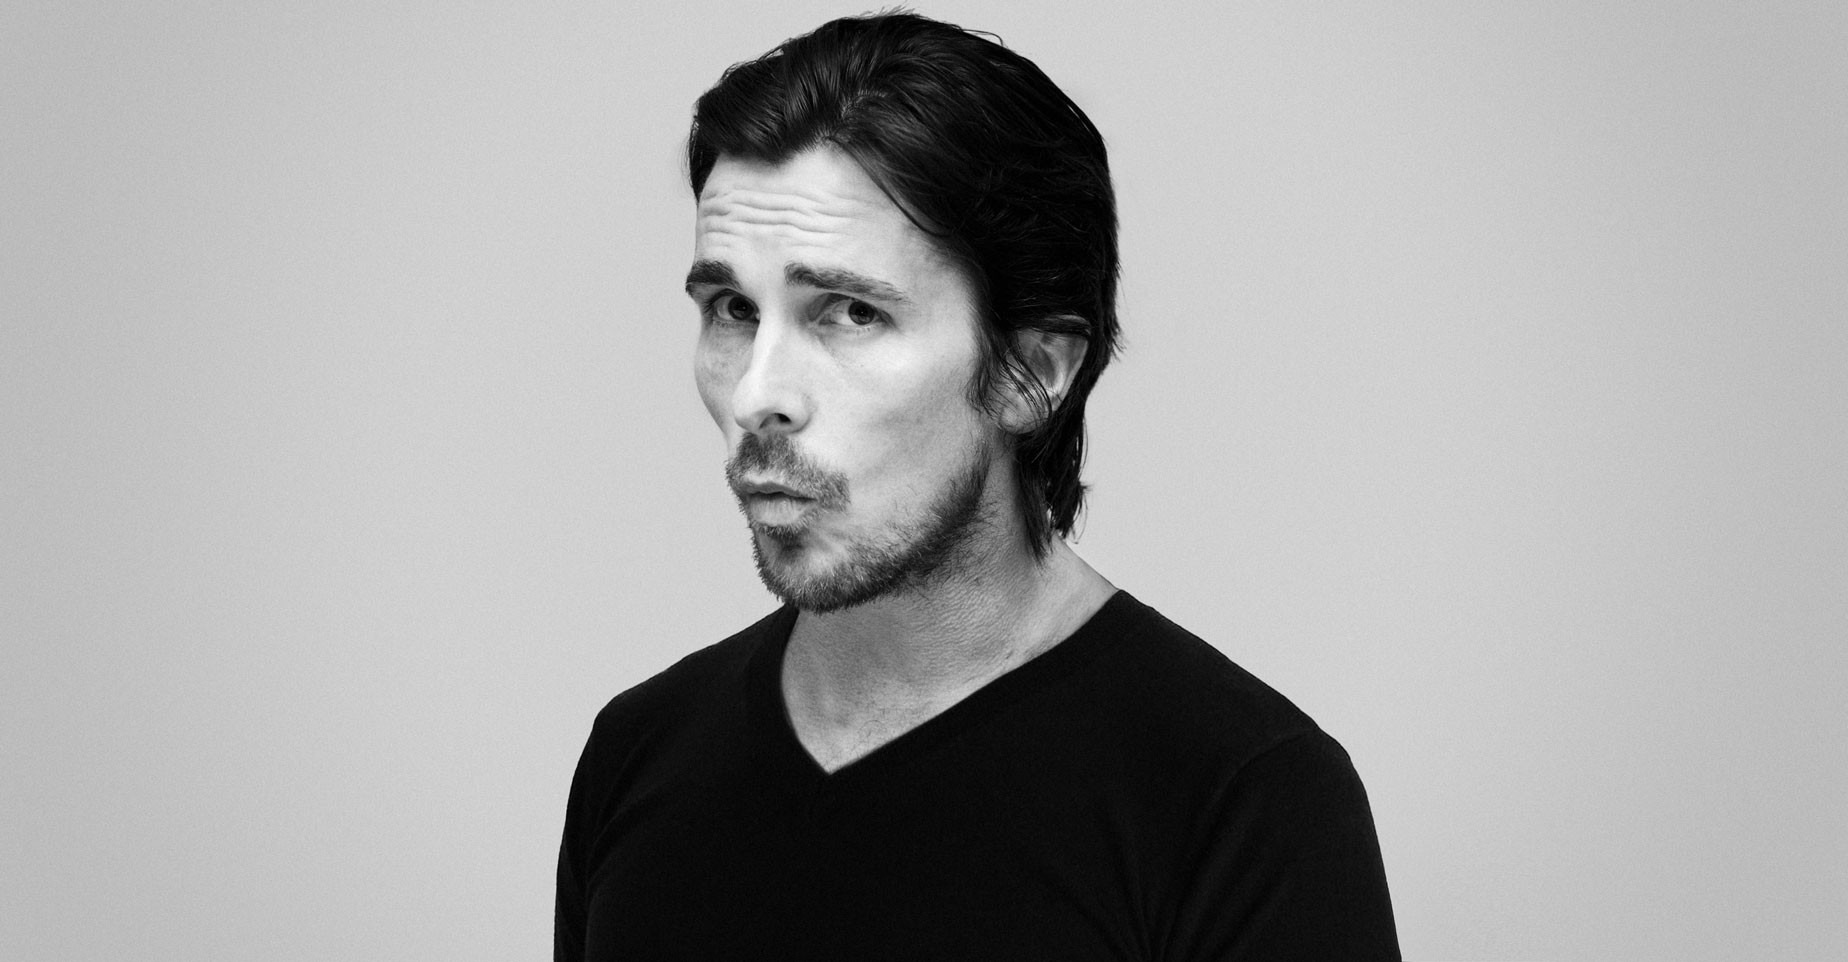 richest celebrity in the world 2020, christianbale